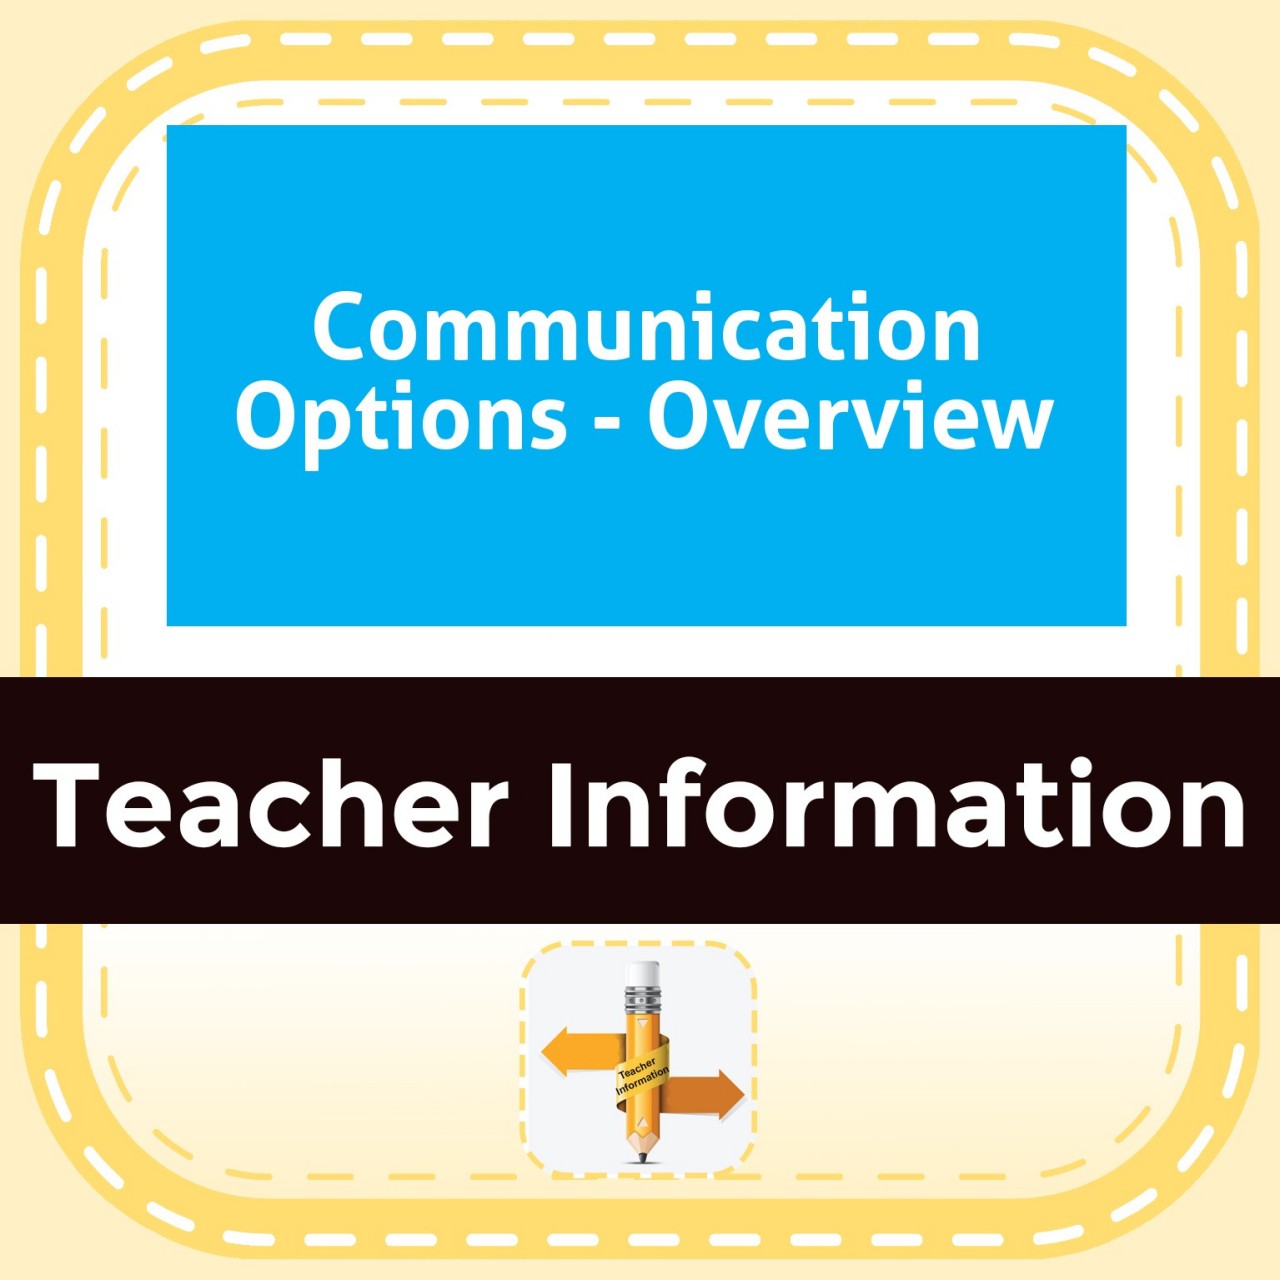 Communication Options - Overview